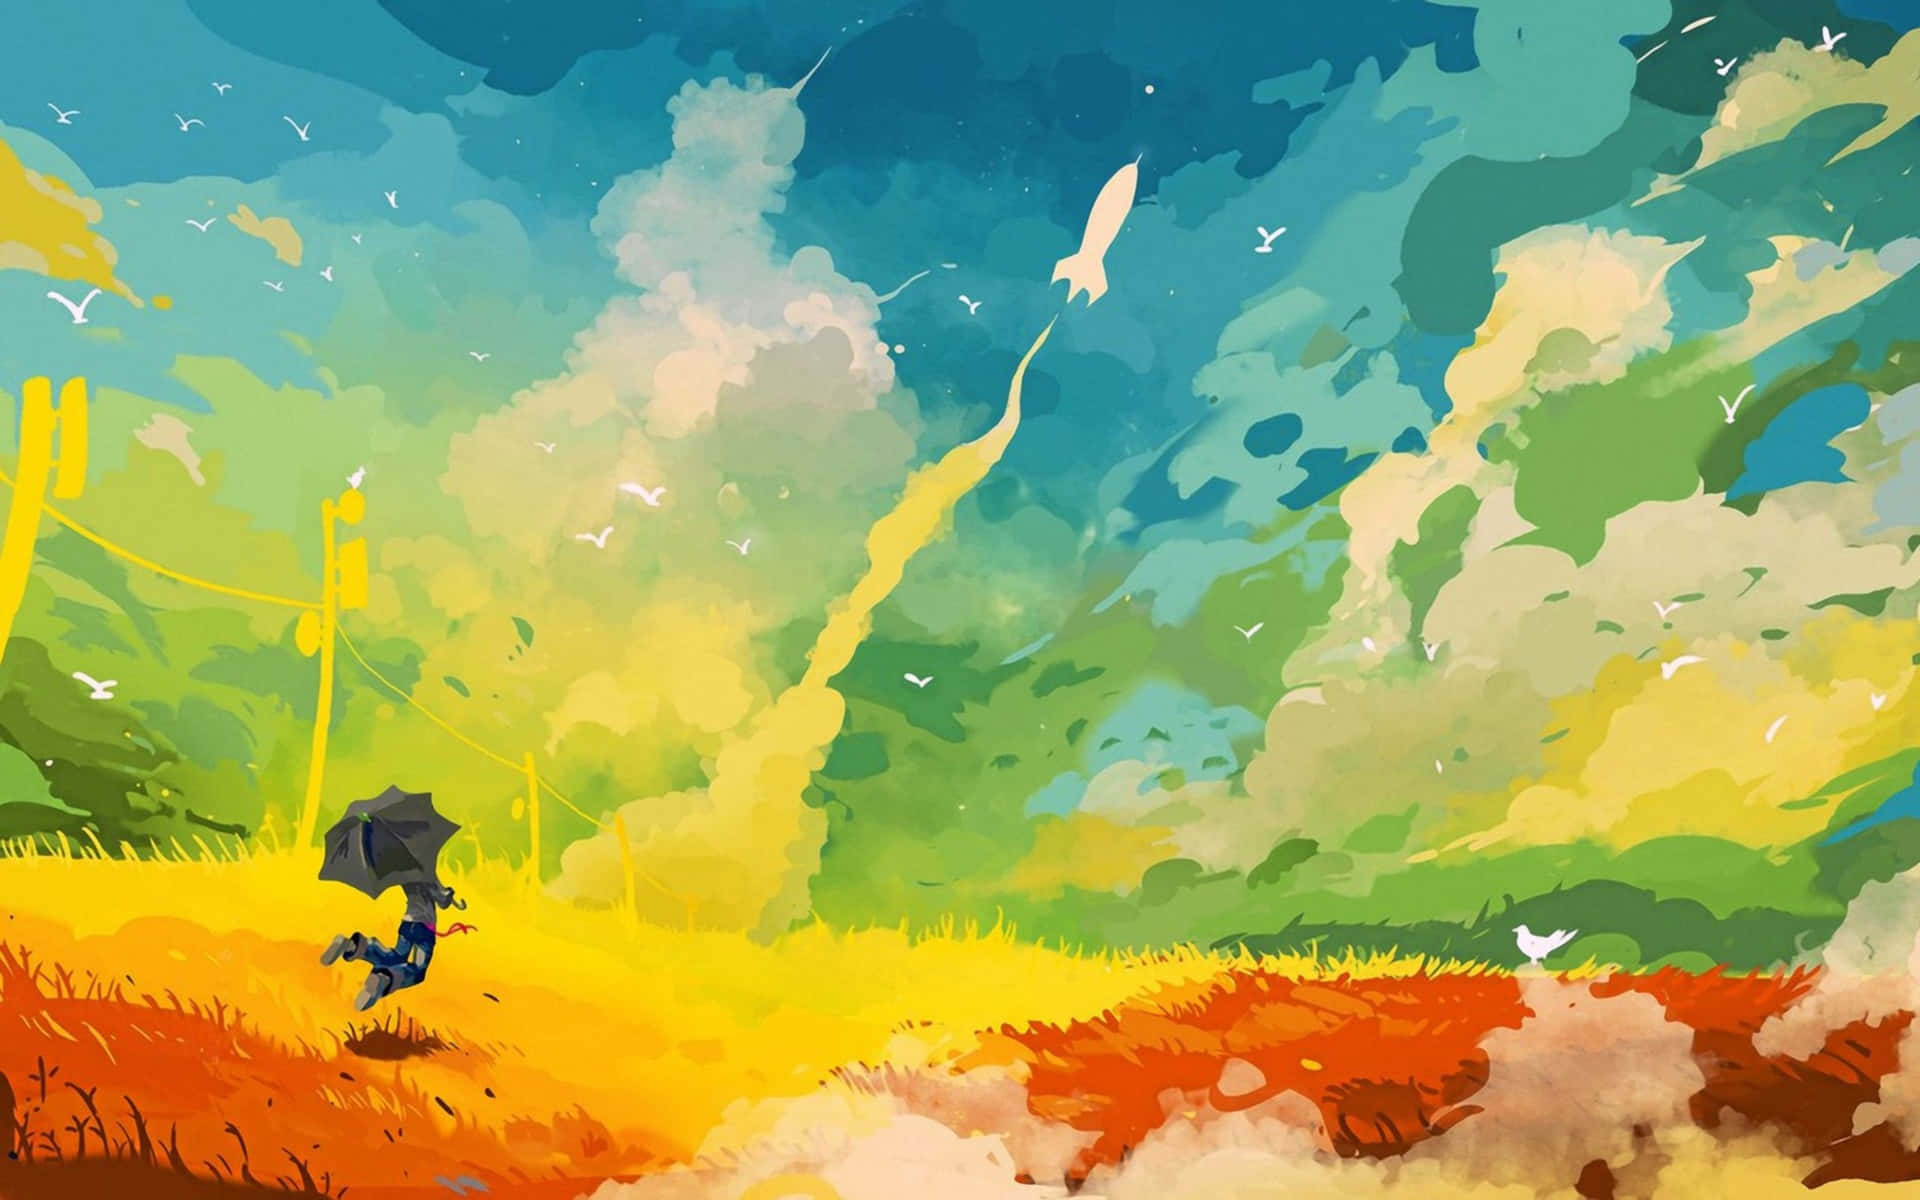 Cool Art Colorful Sky And A Child With Umbrella Wallpaper